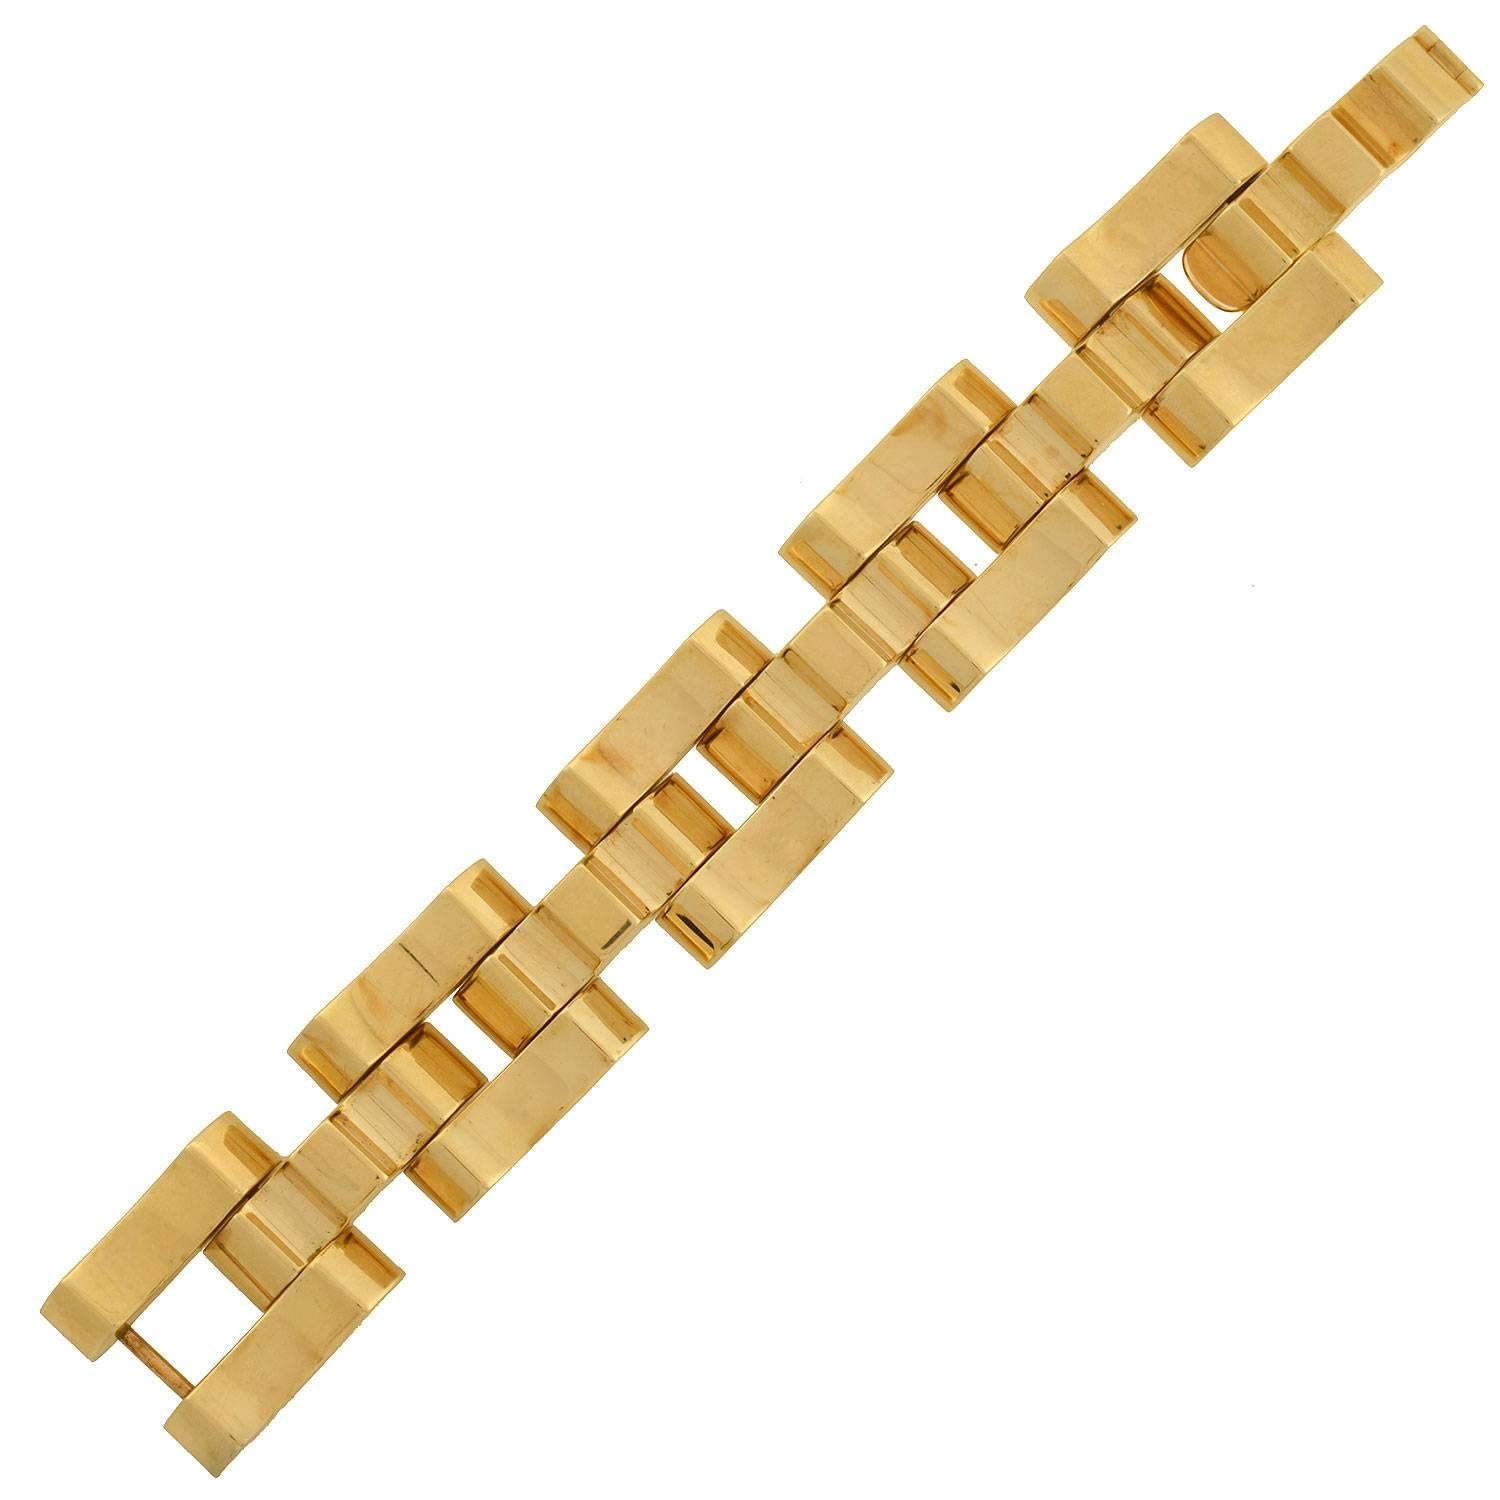 This fabulous Retro bracelet from the 1940s is a signed piece by Tiffany & Co! Made of 14kt gold, the bracelet has a stylish 